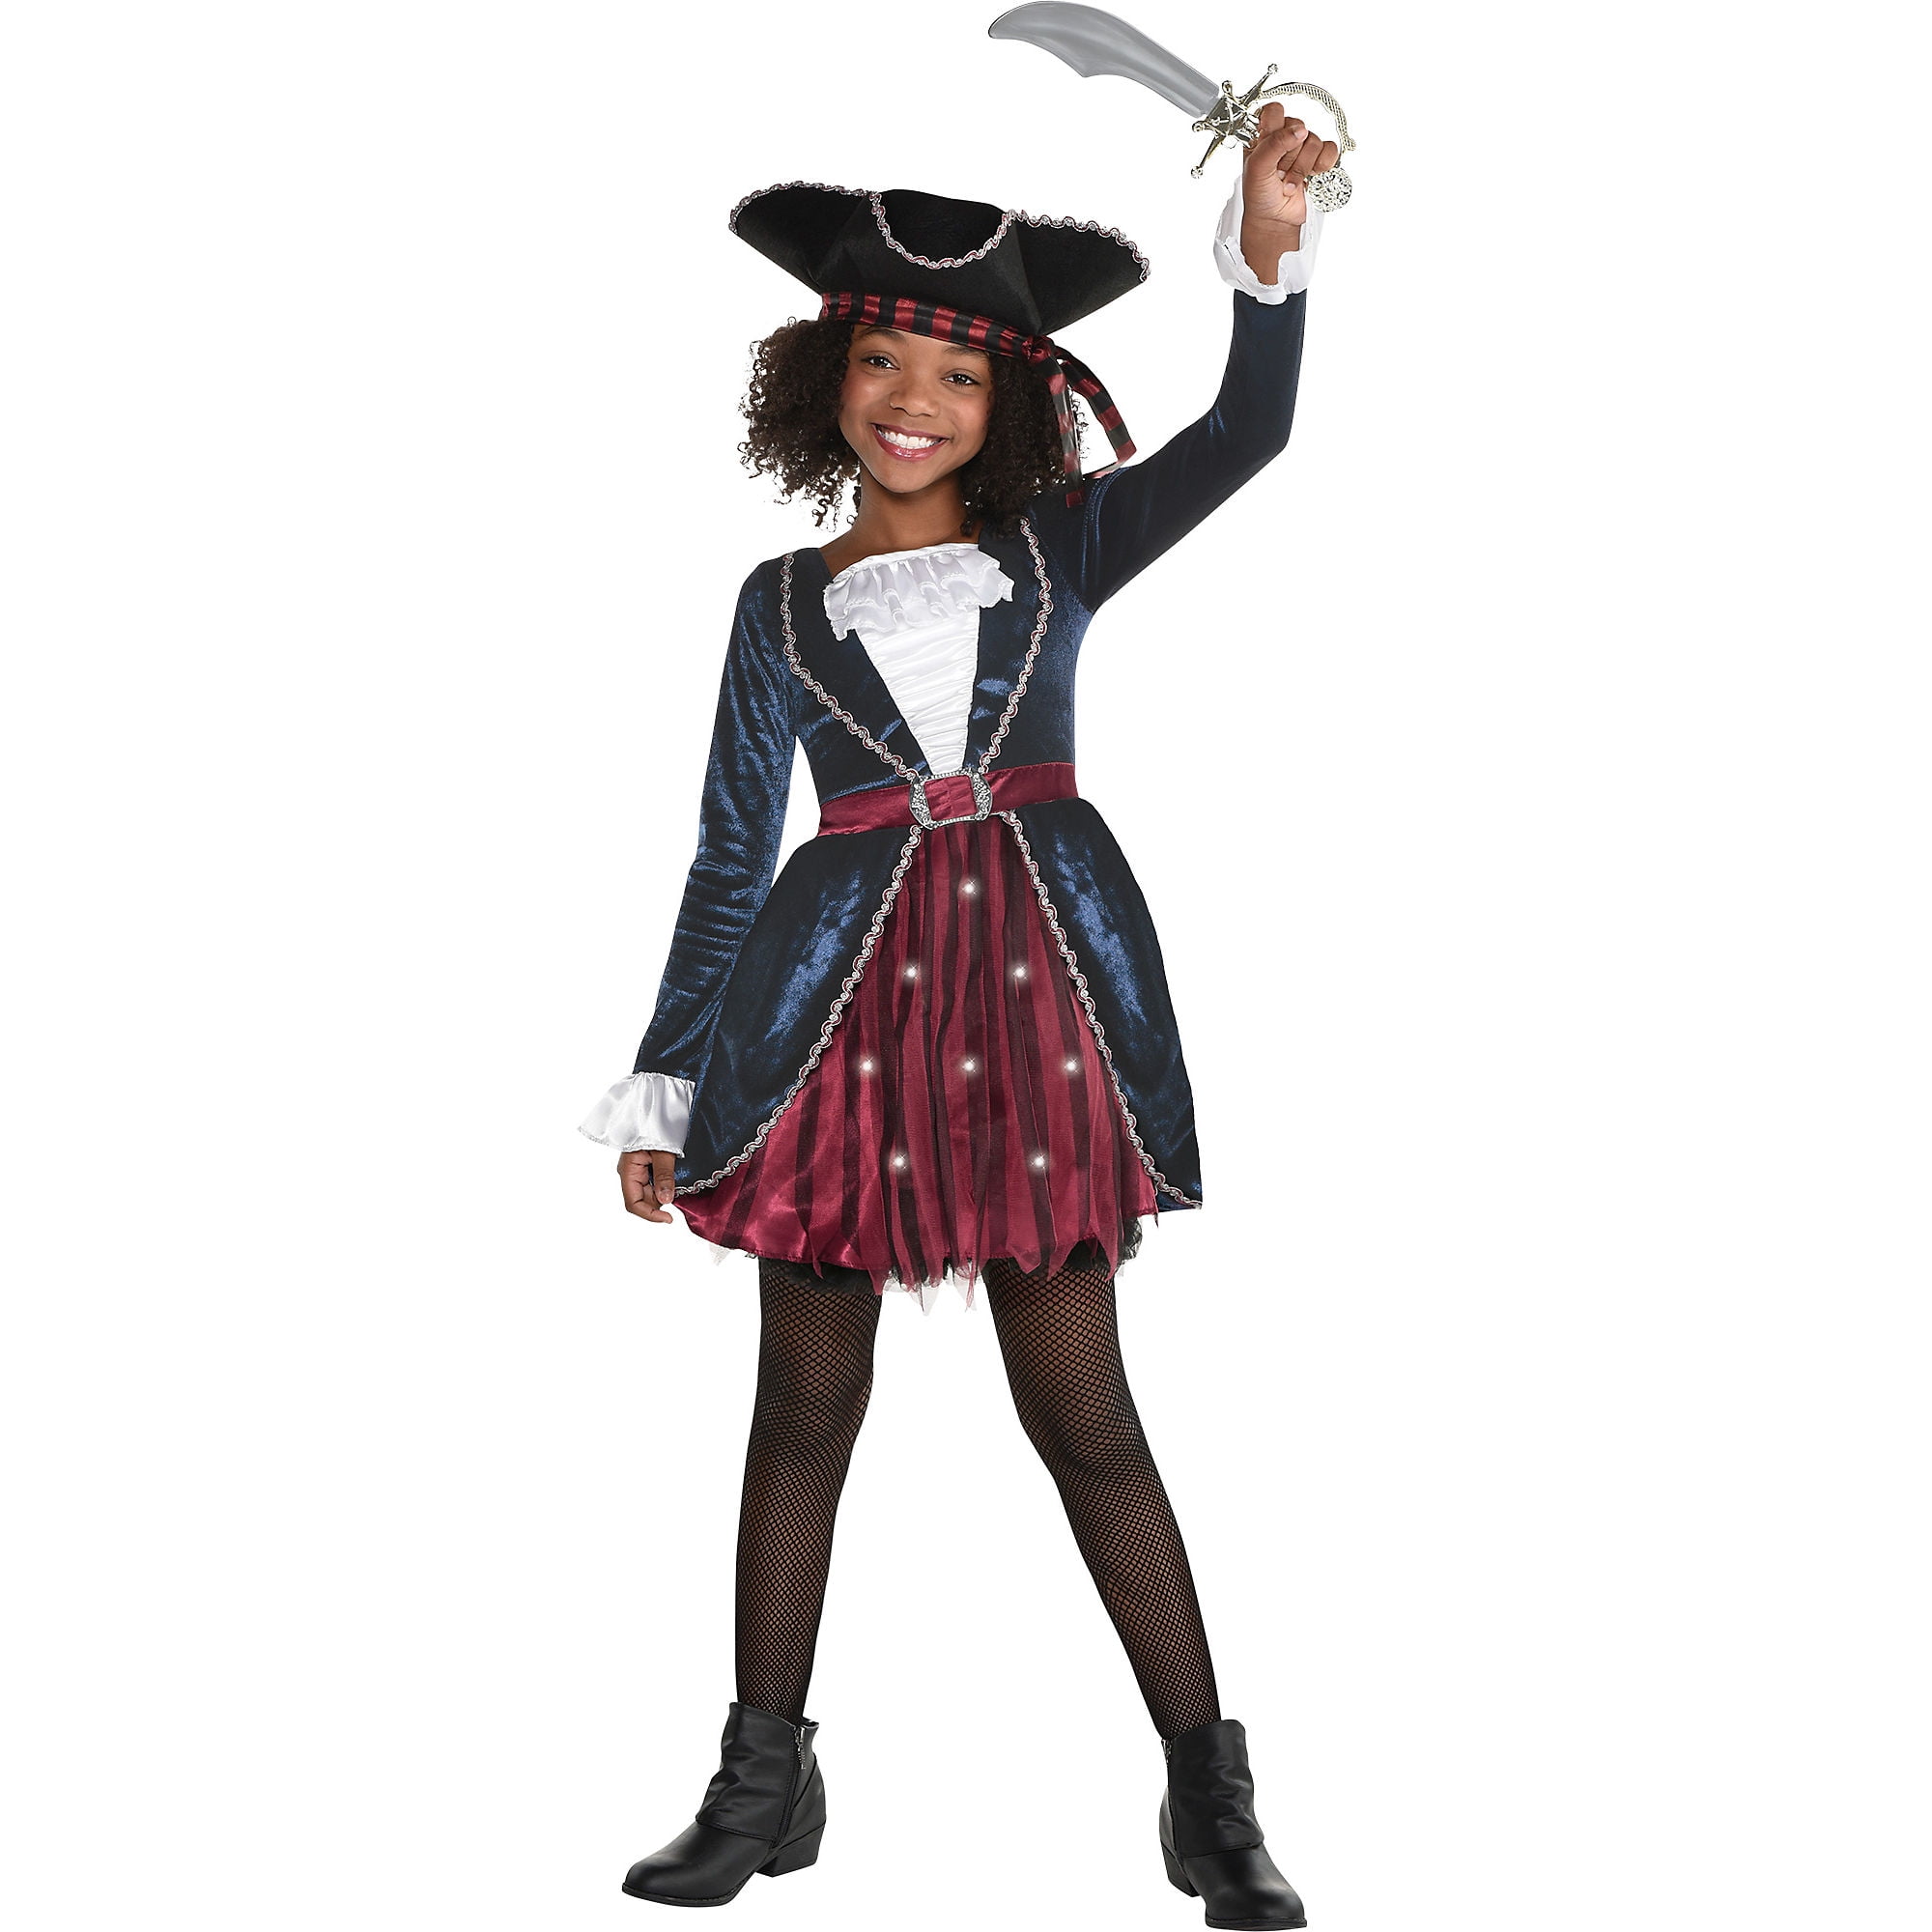 Details about   Baby Boy Girl Halloween Pirate Captain Costume Outfit Cloth Cosplay Fancy Dress 